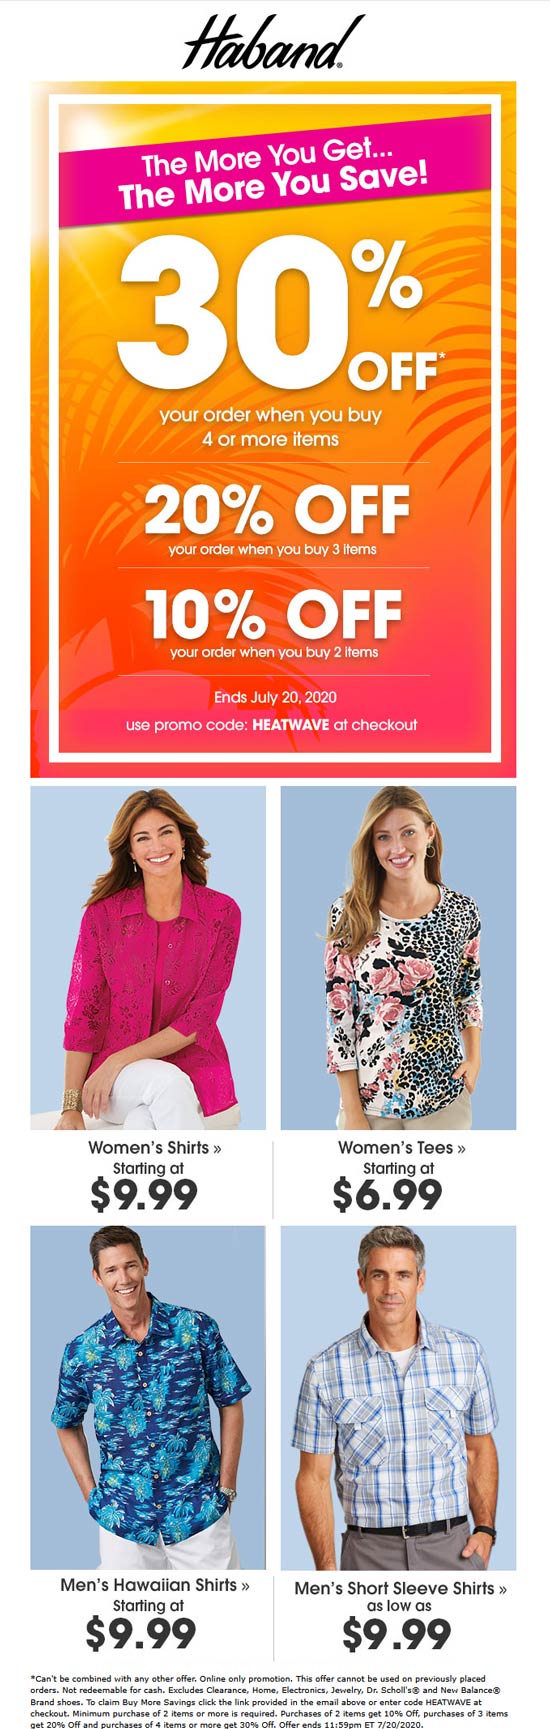 Haband stores Coupon  10-30% off 2+ items online at Haband via promo code HEATWAVE #haband 